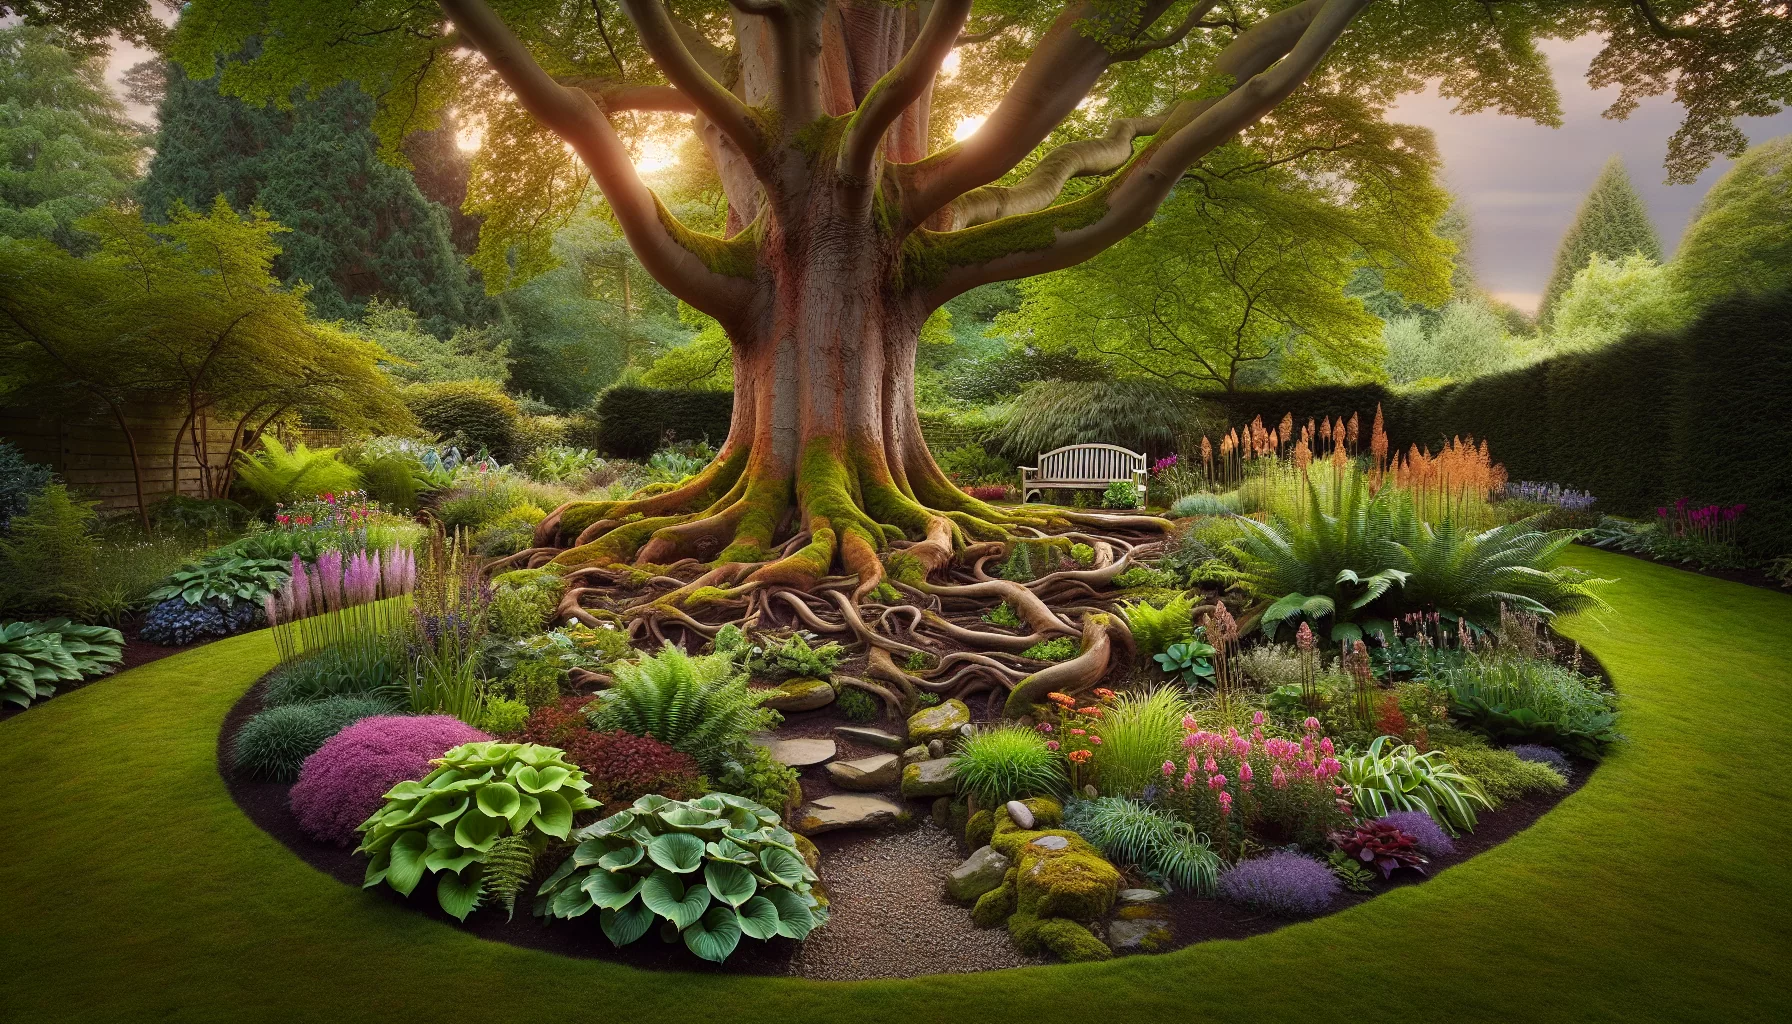 Mastering landscaping around exposed tree roots: tips and strategies for a beautiful garden